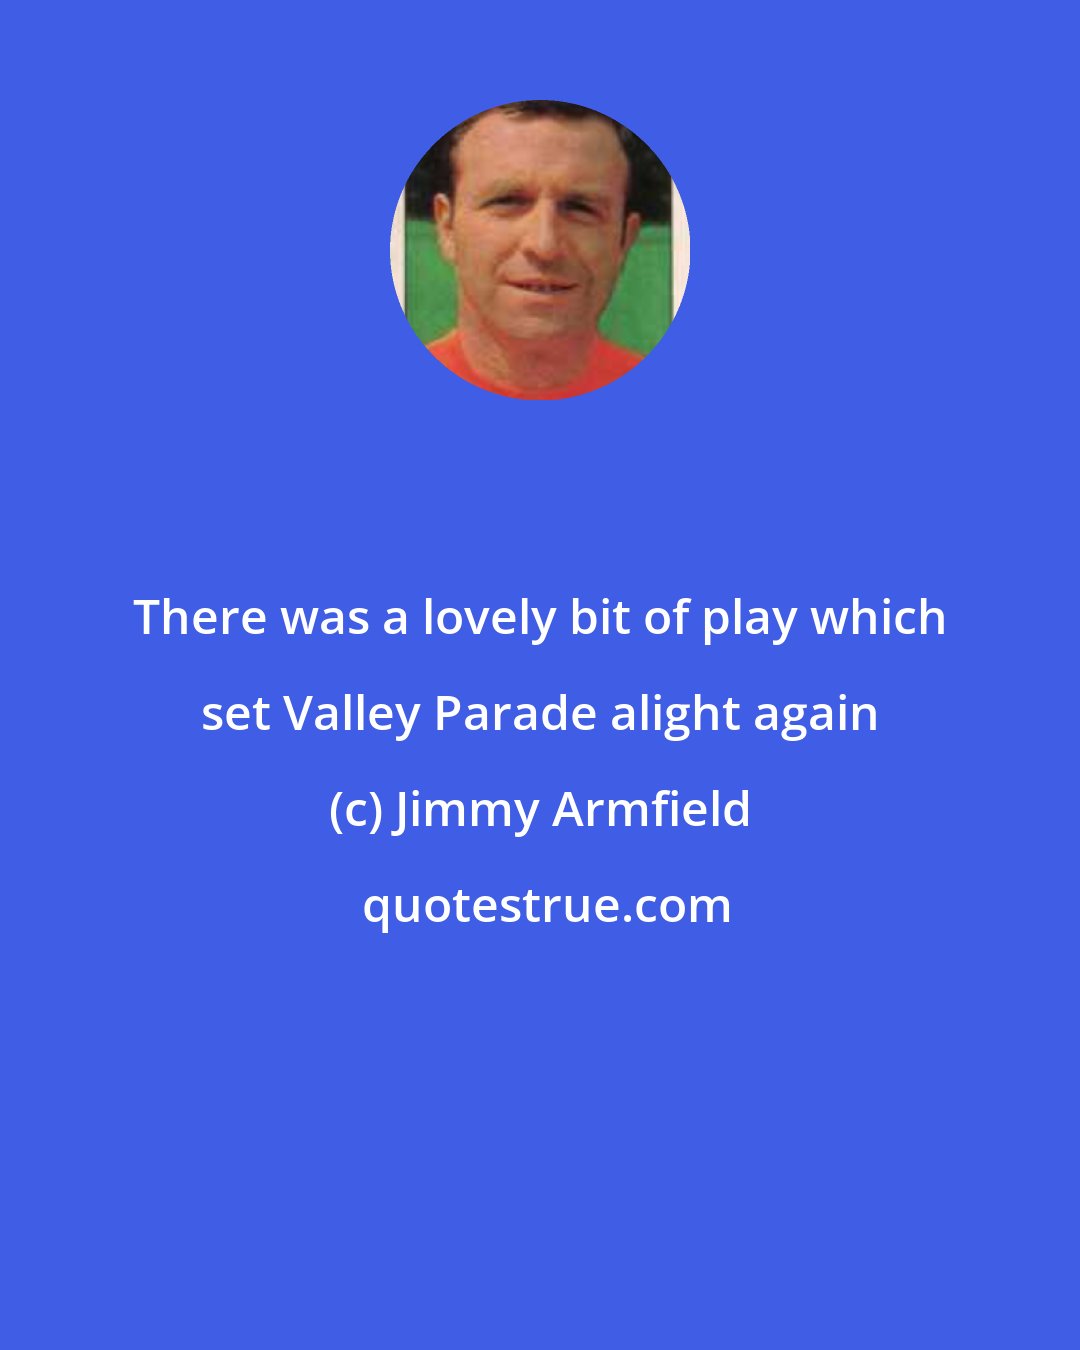 Jimmy Armfield: There was a lovely bit of play which set Valley Parade alight again